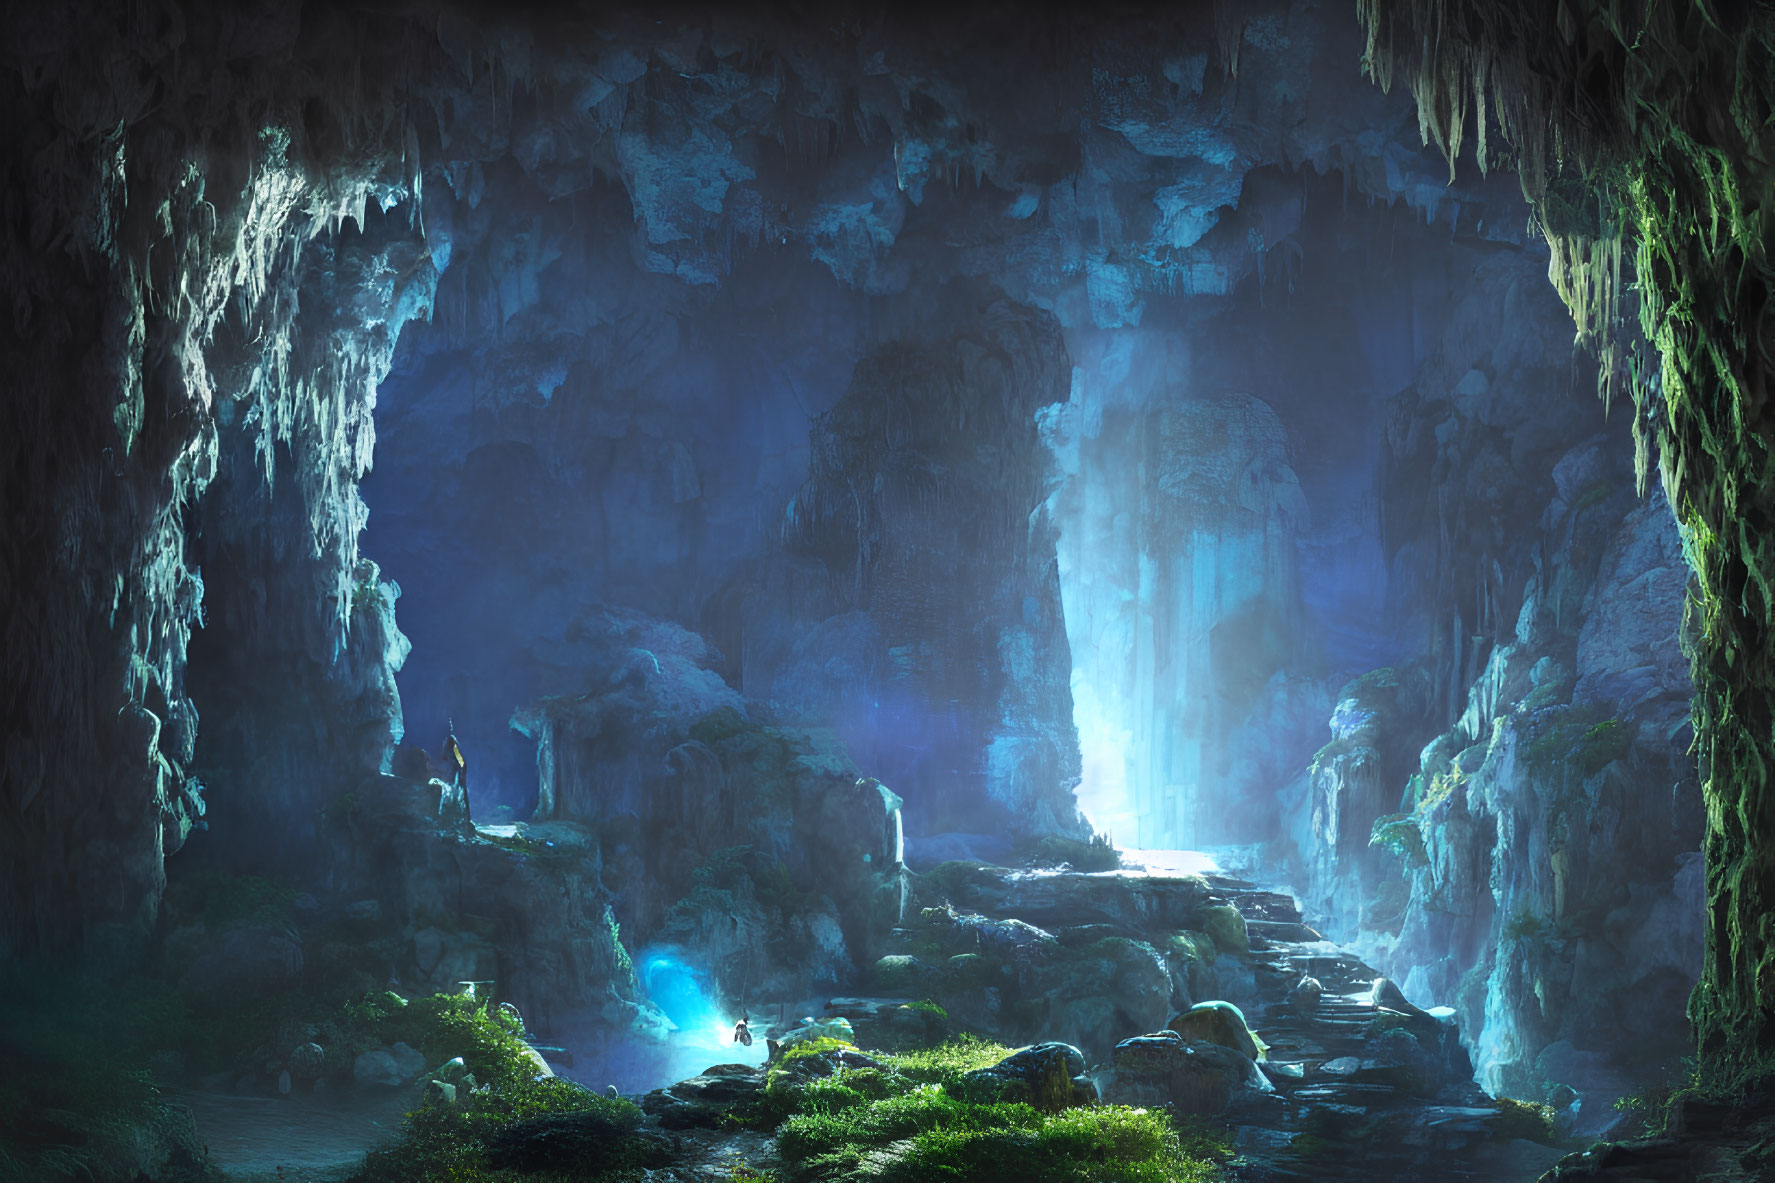 Mystical Blue-Lit Underground Cave with Stalactites & Waterfall